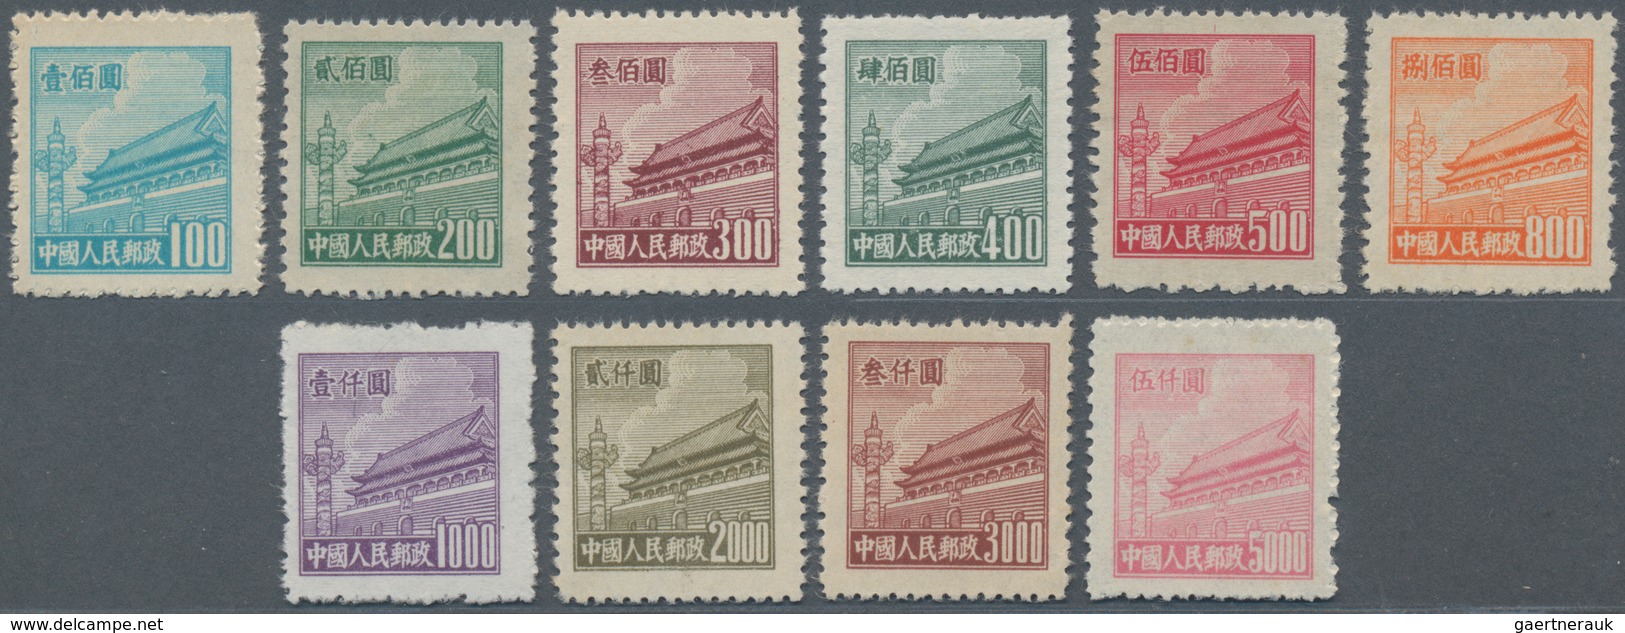 China - Volksrepublik: 1950/51, Gate Of Heavenly Peace Definitives, Fourth Issue (R4), Complete Set - Covers & Documents